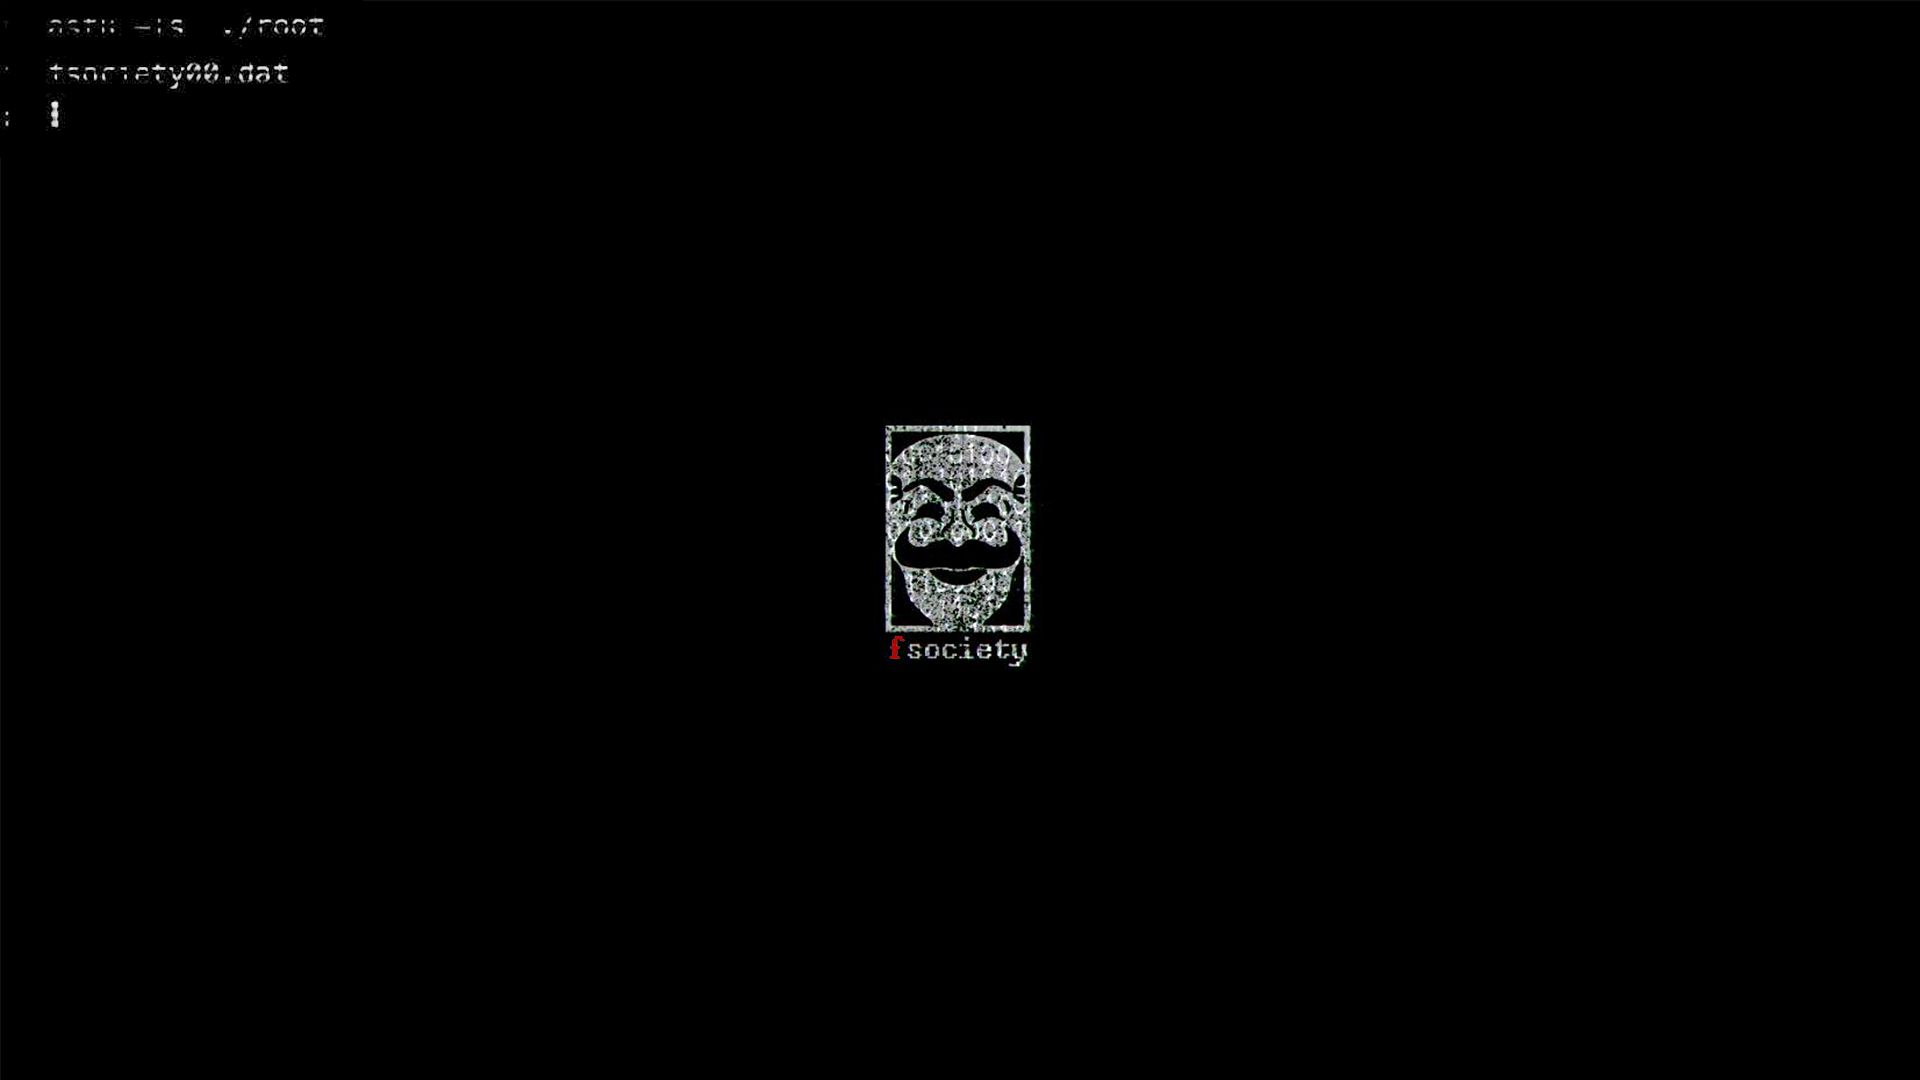 Mr Robot wallpapers for desktop, download free Mr Robot pictures and  backgrounds for PC